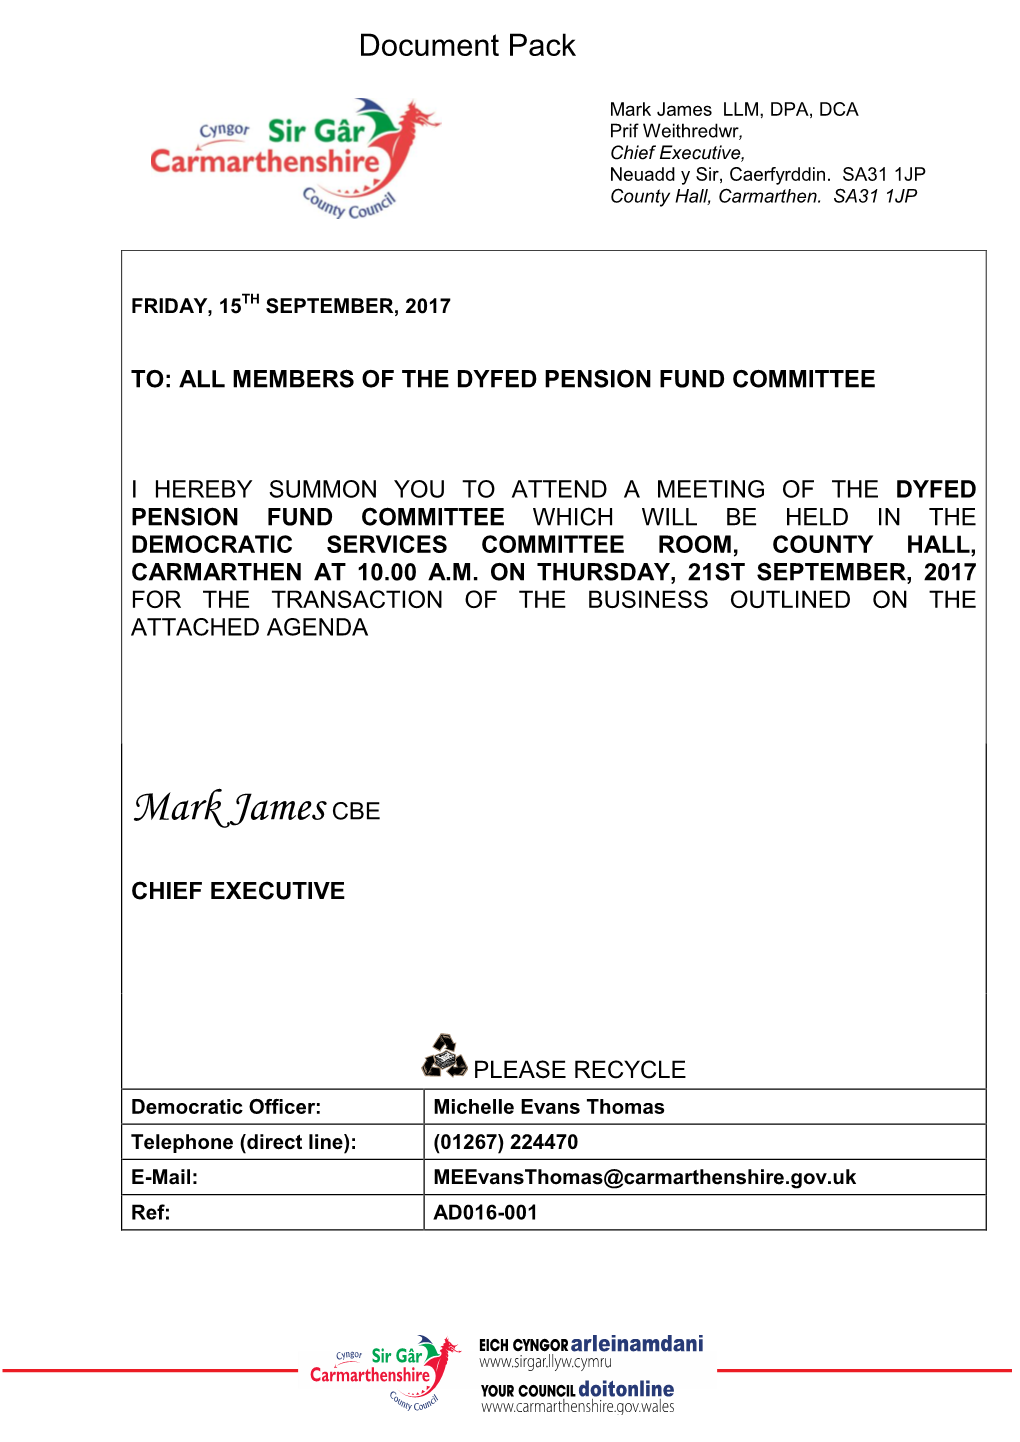 (Public Pack)Agenda Document for Dyfed Pension Fund Committee, 21